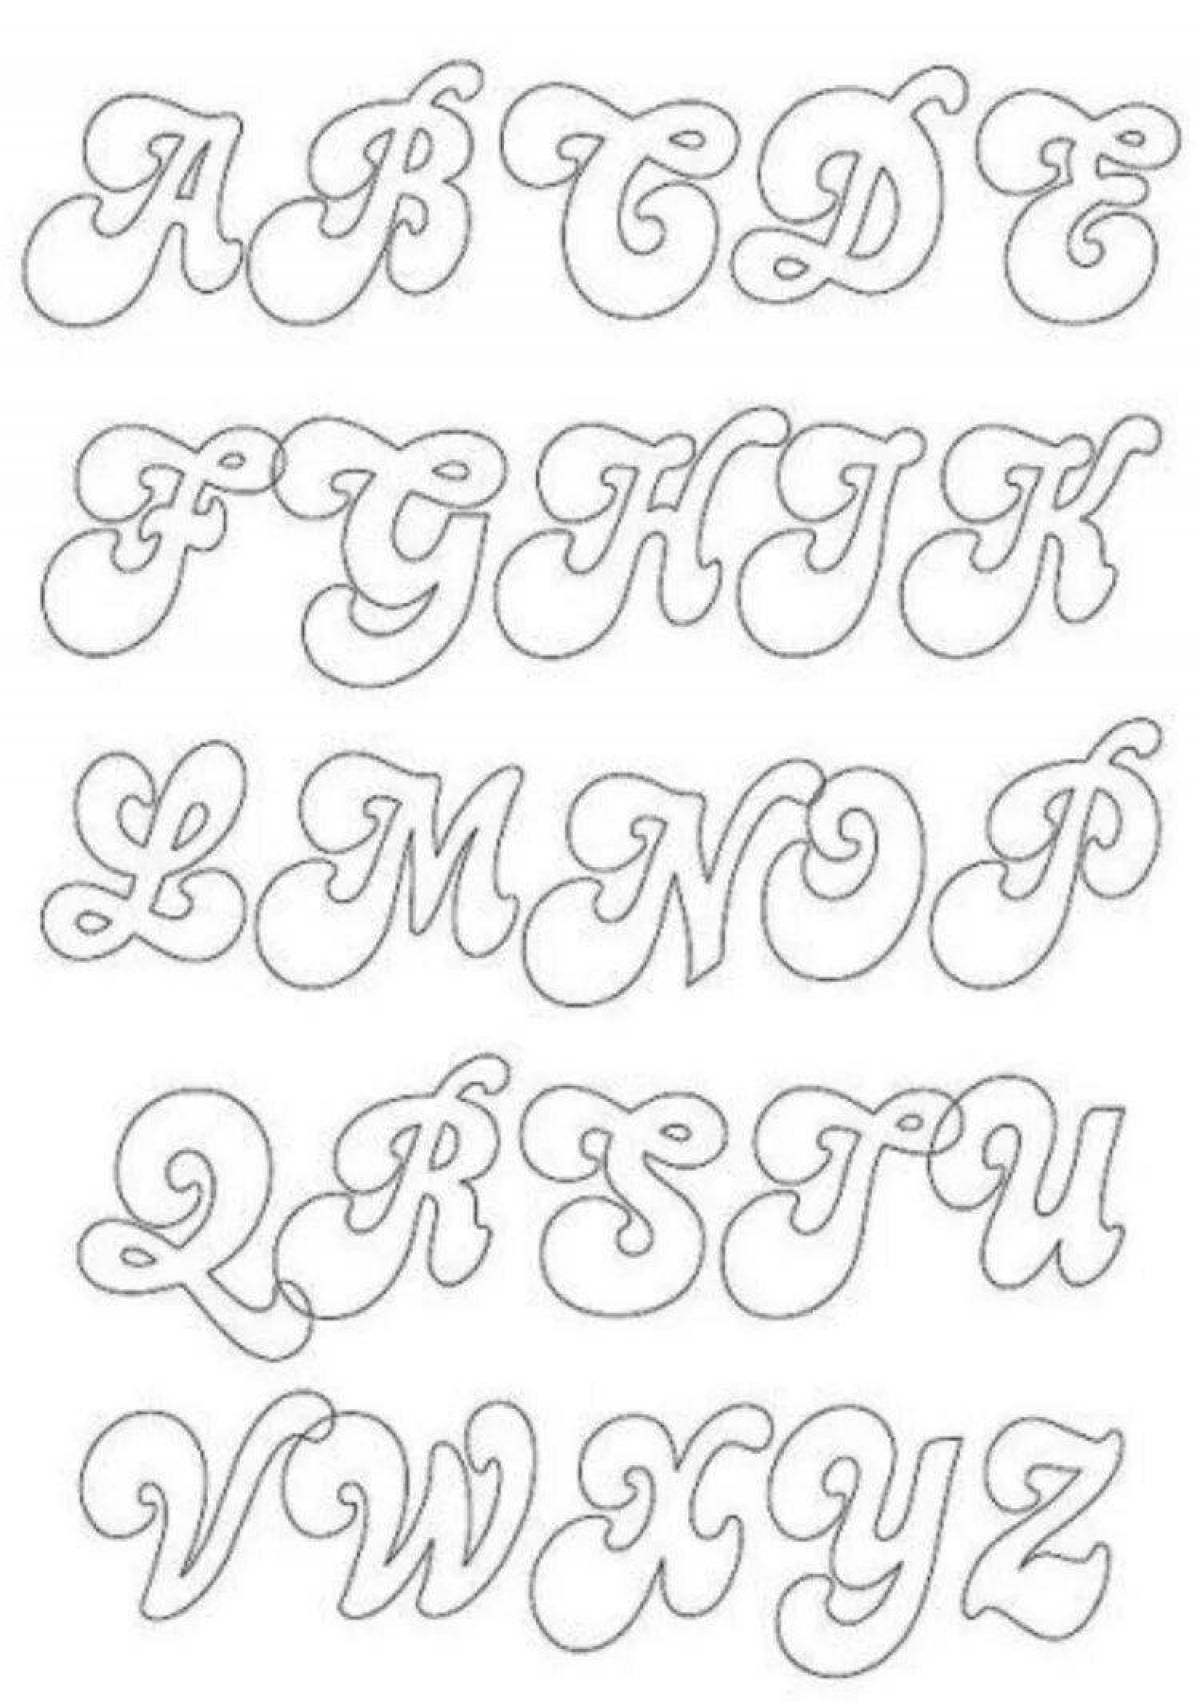 Nice coloring book with nice font